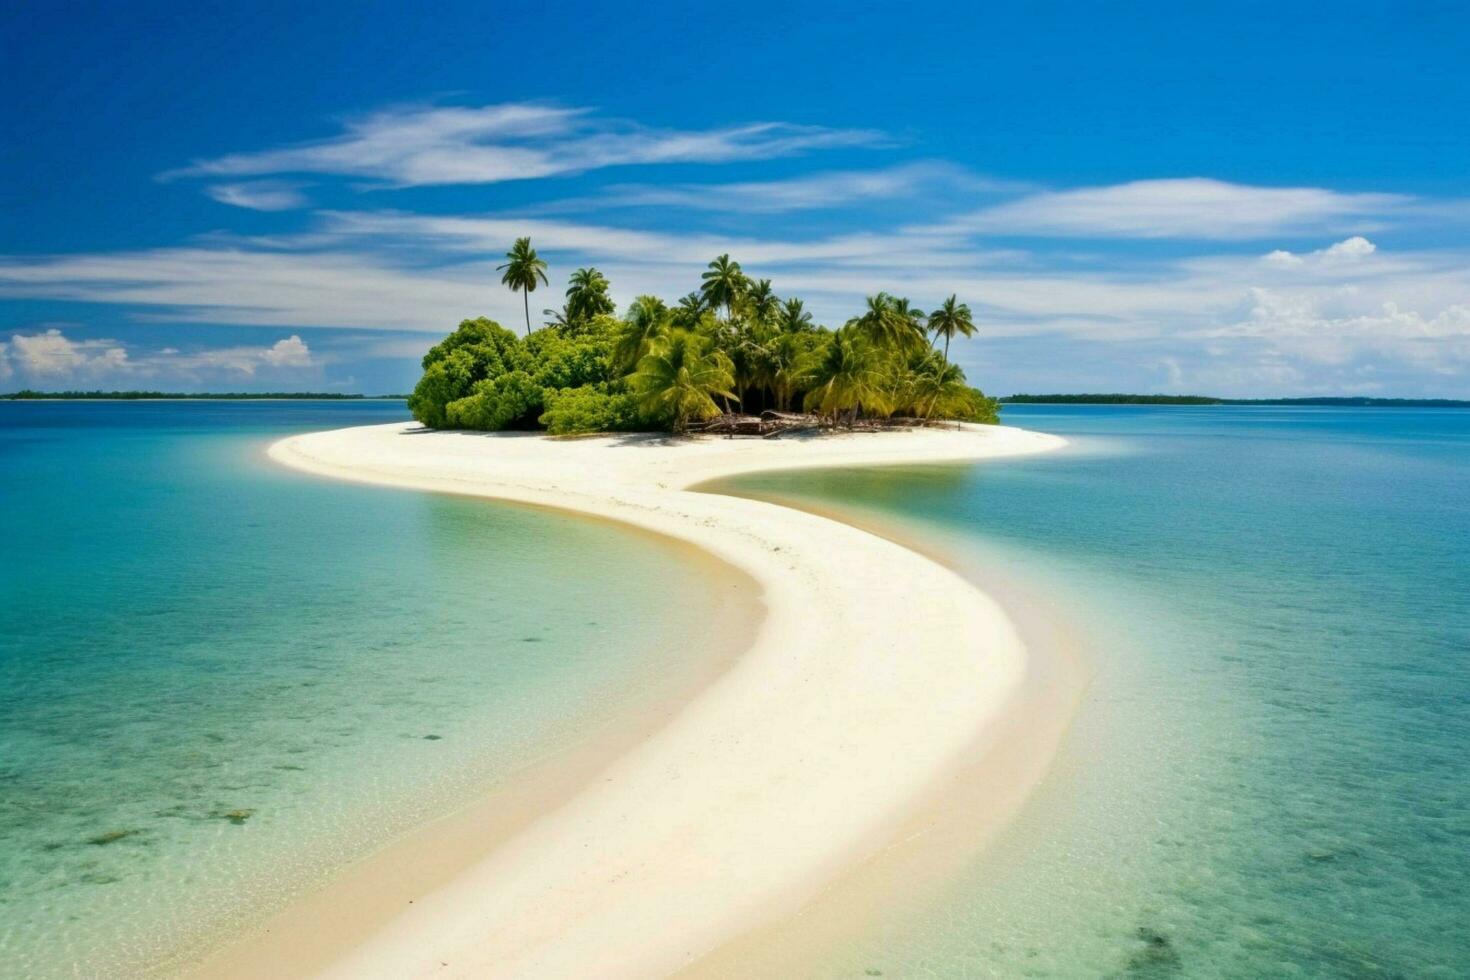 A peaceful island with white sandy beaches photo